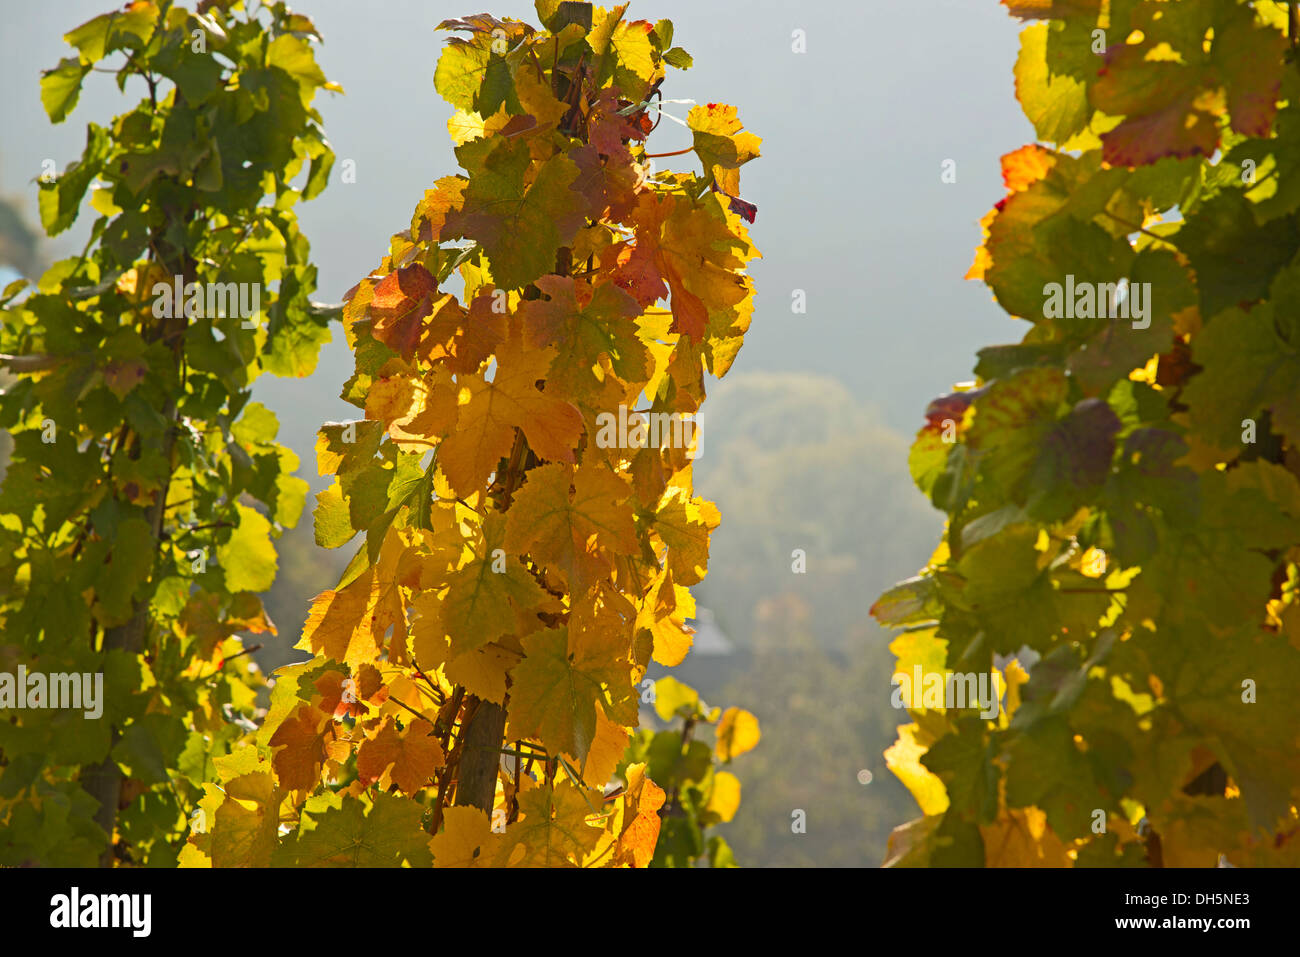 Autumn leaves in a vineyard, wine-growing area where Pinot Noir and Blue Portuguese grapes are commonly grown Stock Photo